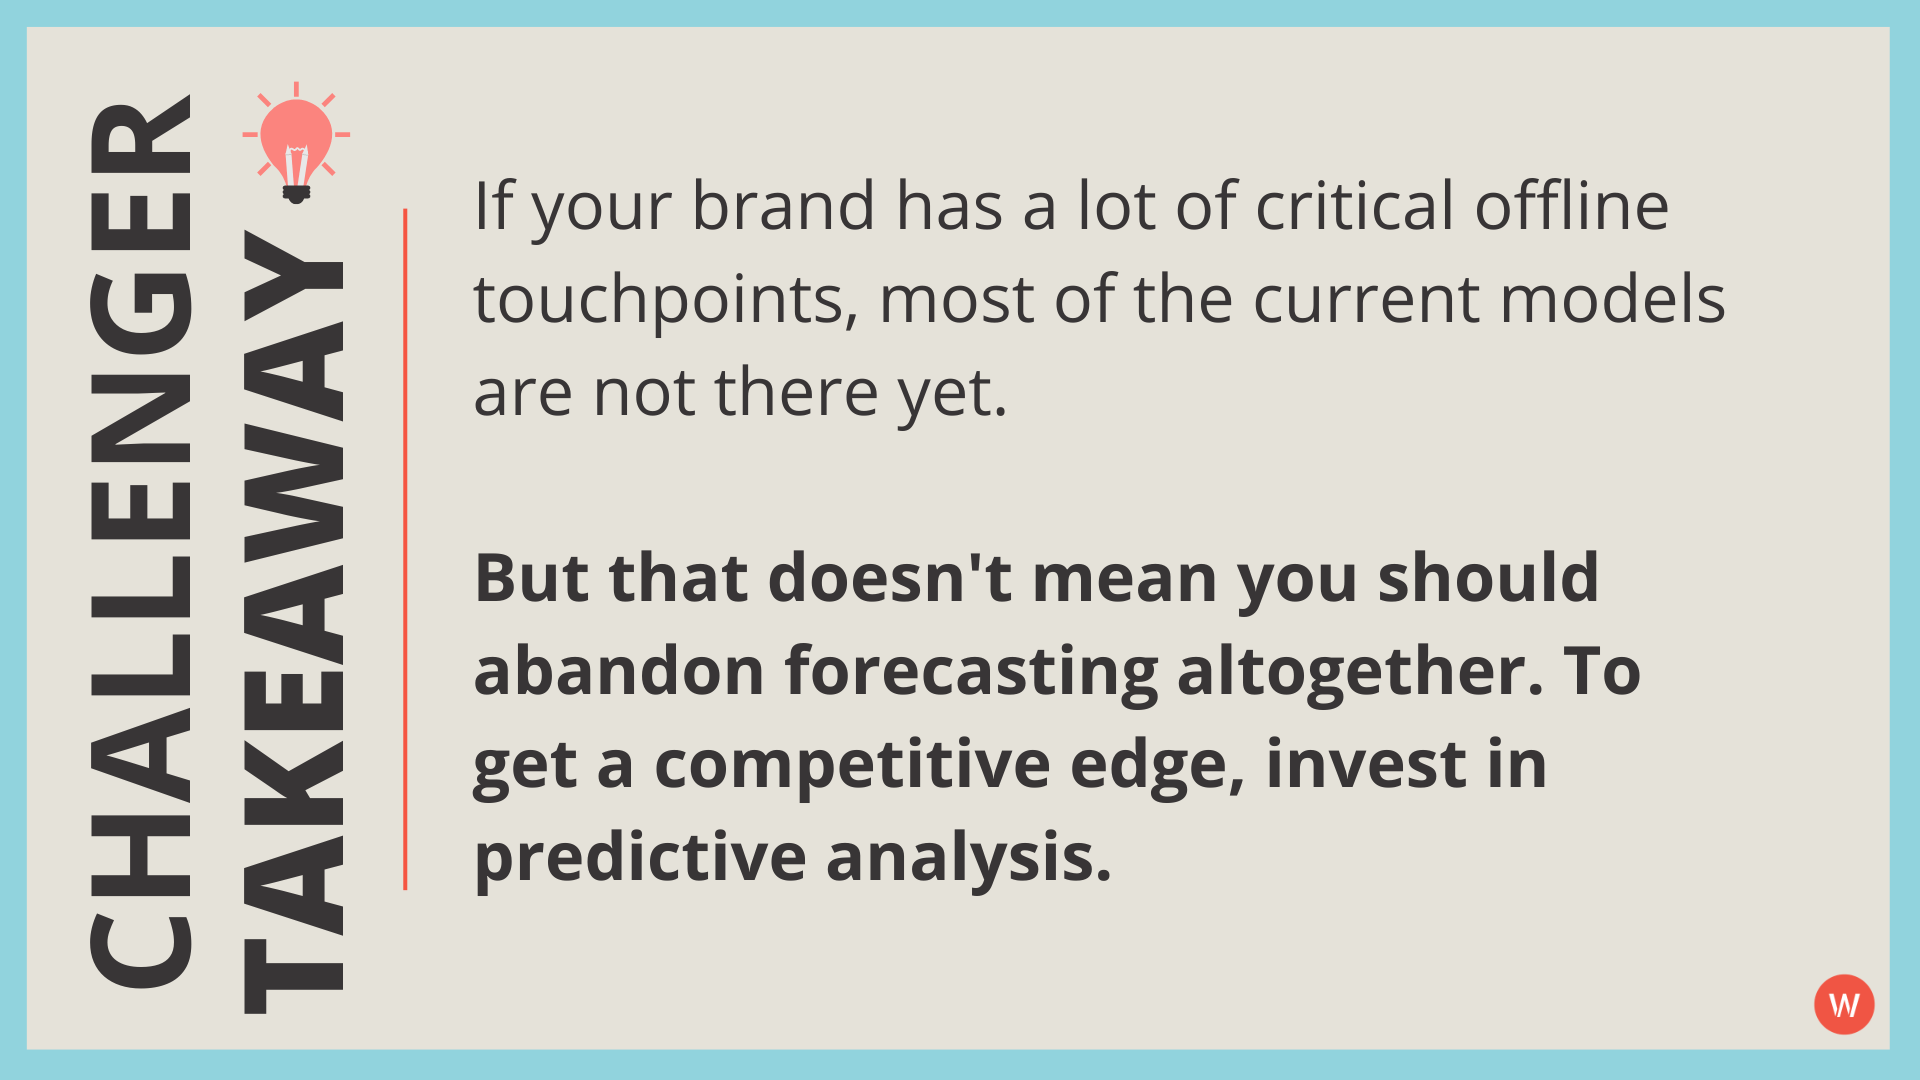 If your brand has a lot of critical offline touchpoints, most of the current models are not there yet. But that doesn’t mean you should abandon forecasting altogether. To get a competitive edge, invest in predictive analysis.